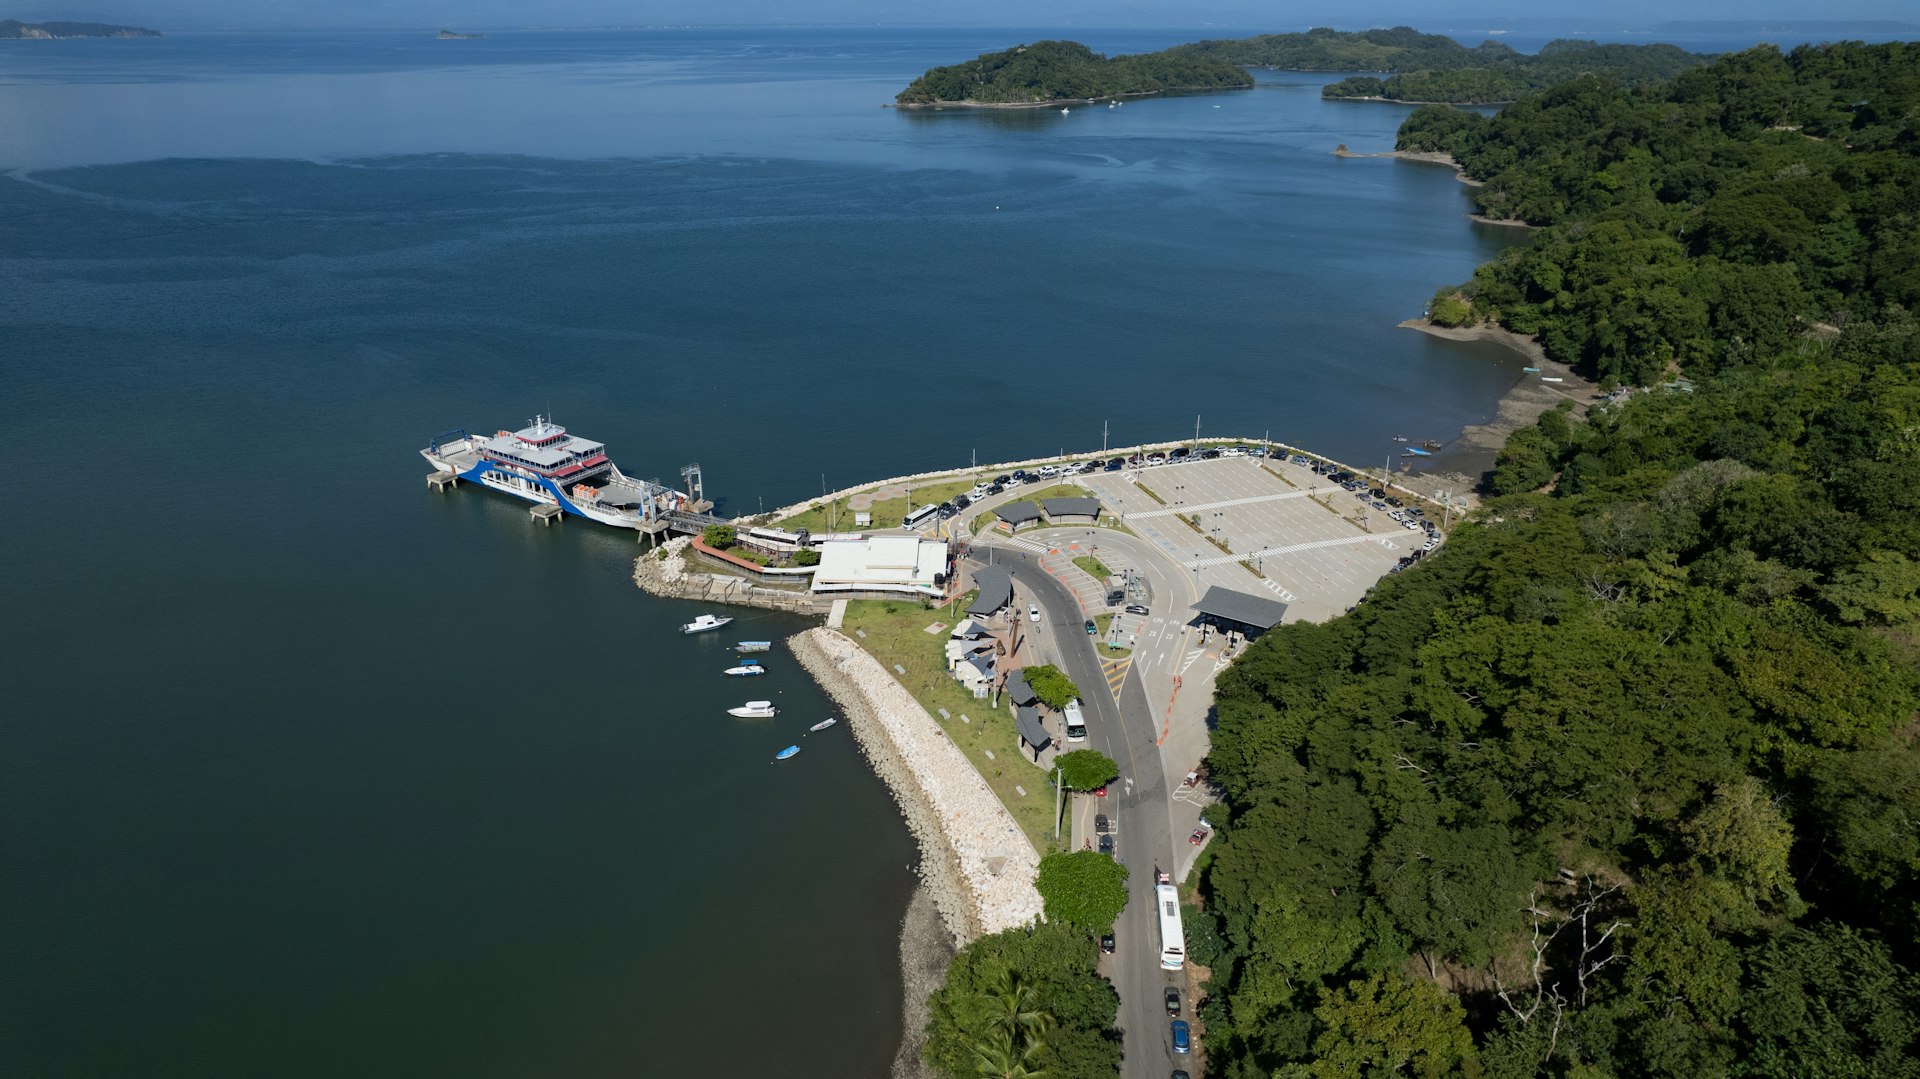 An aerial view of a ferry docked at Paquera. The water is calm and the shore is heavily forested